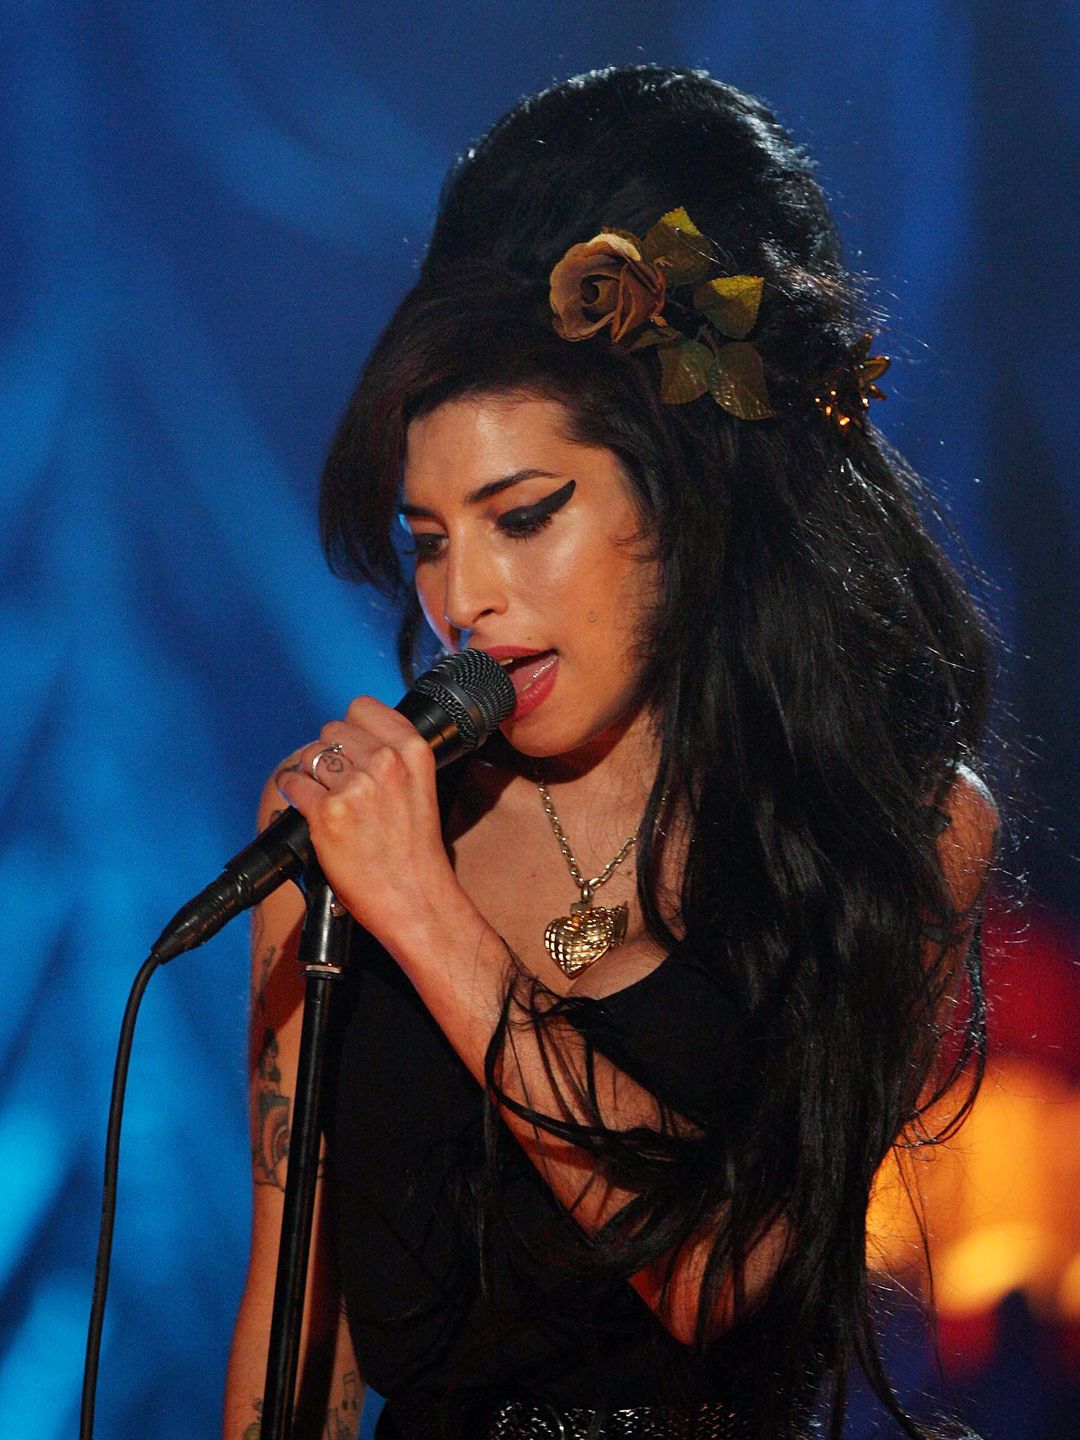 Amy Winehouse performs at the 2008 Grammy Awards